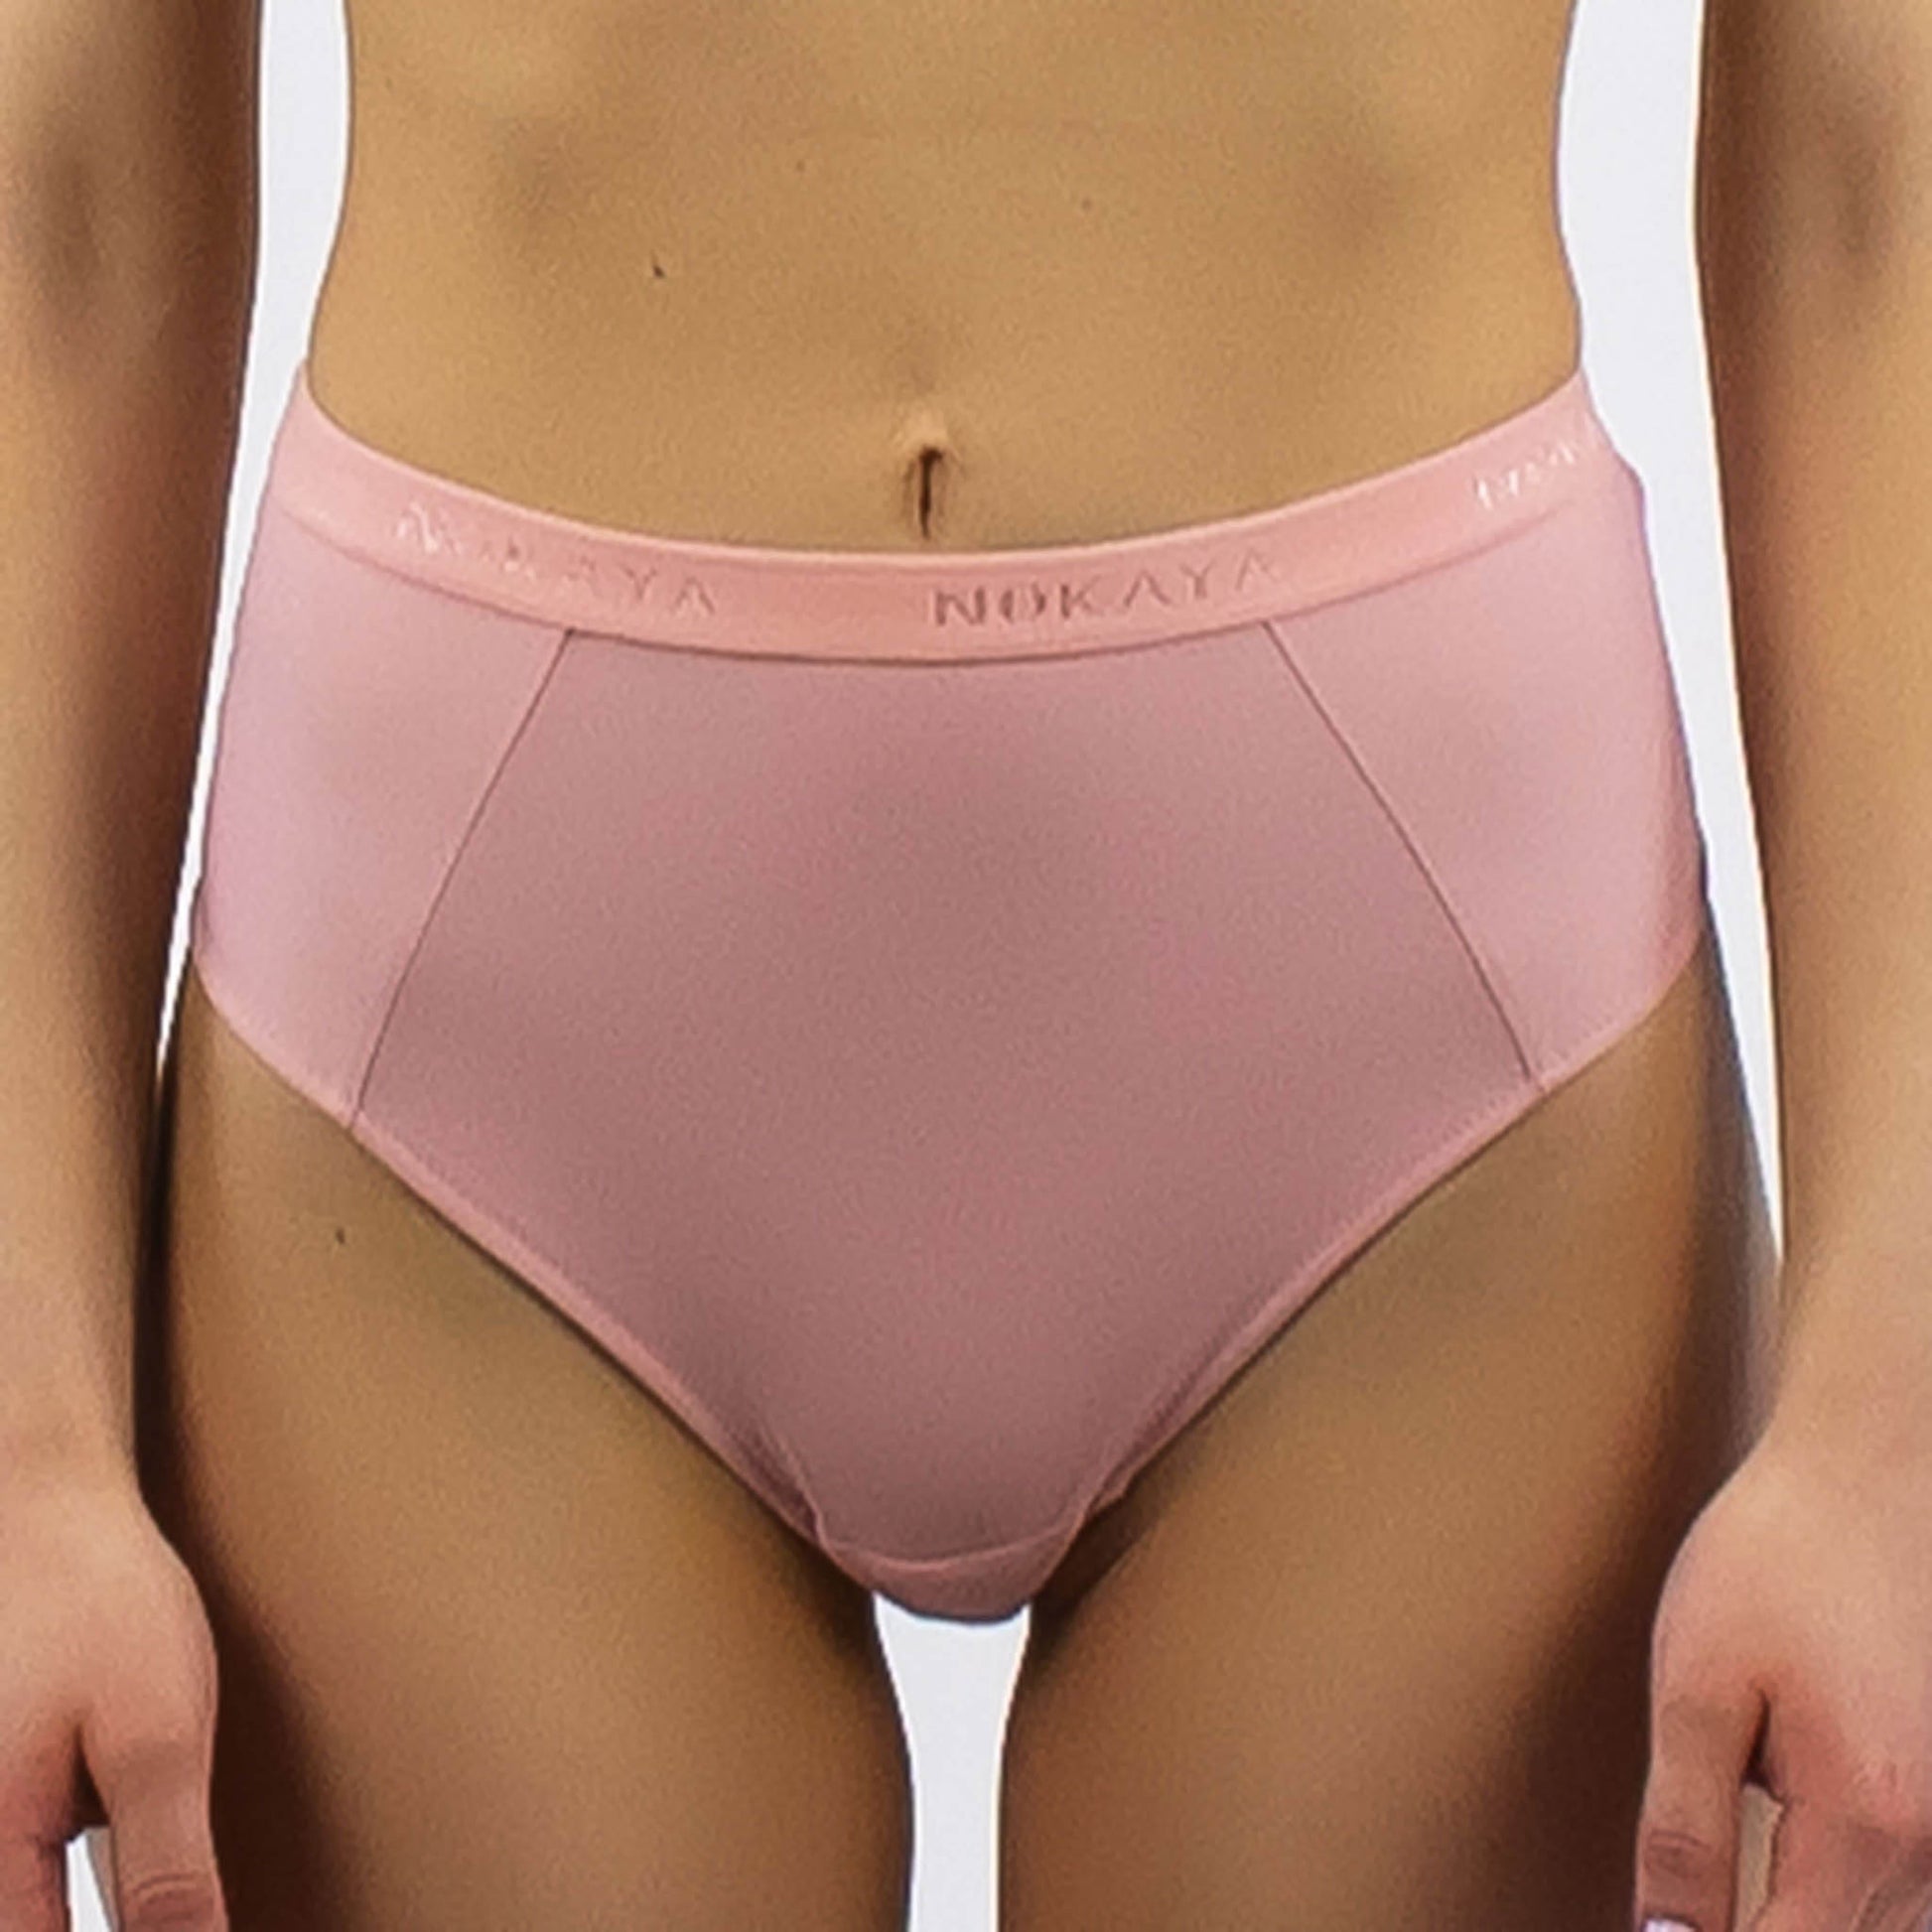 NAKED EVERYDAY LOW RISE COTTON WOMEN THONG UNDERWEAR PANTY BOTTOM